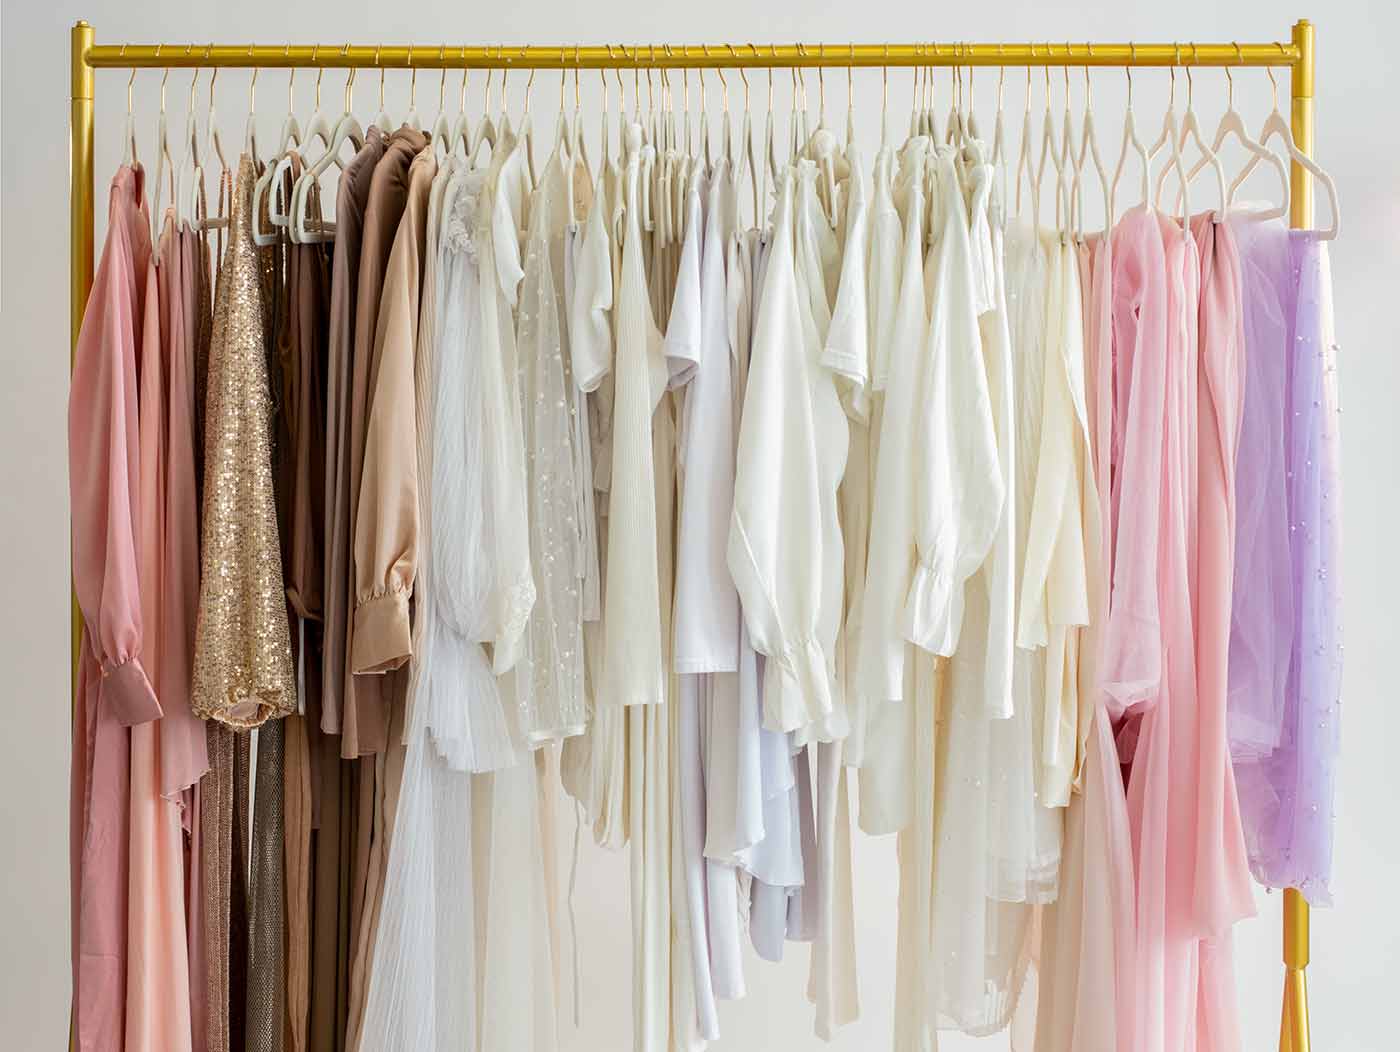 Garment rack showcasing a wide assortment of pregnancy dresses in a broad range of colors and textures.